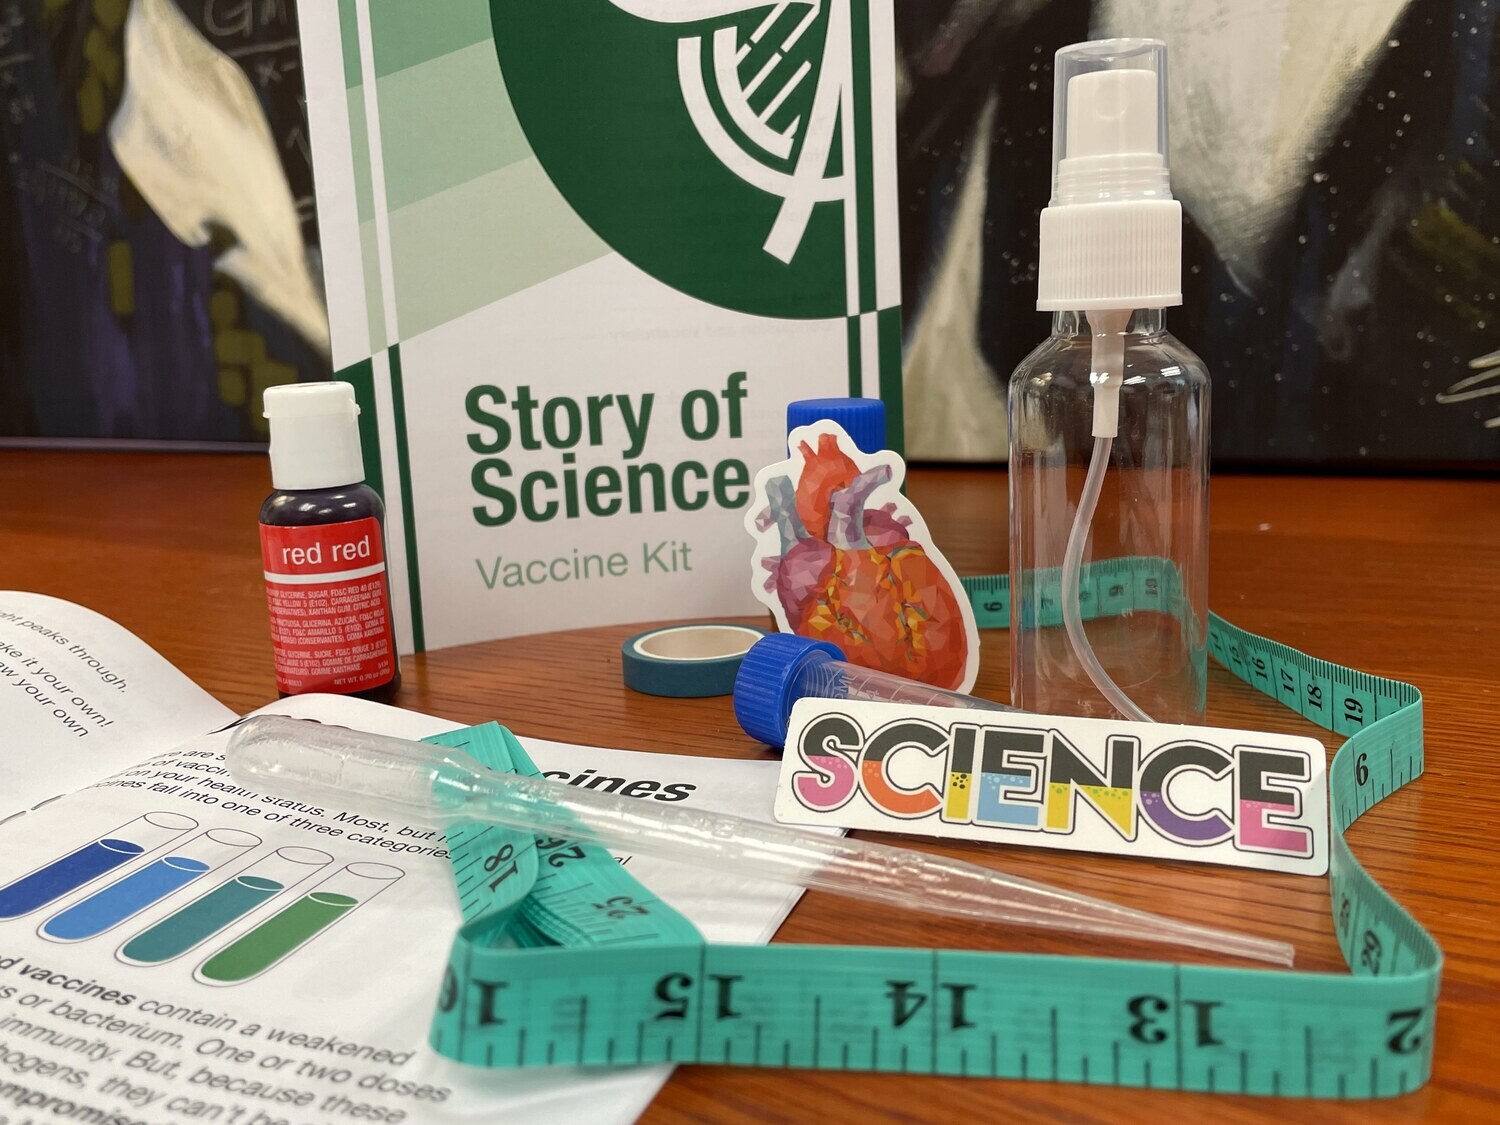 The Story of Science - Vaccine Kit